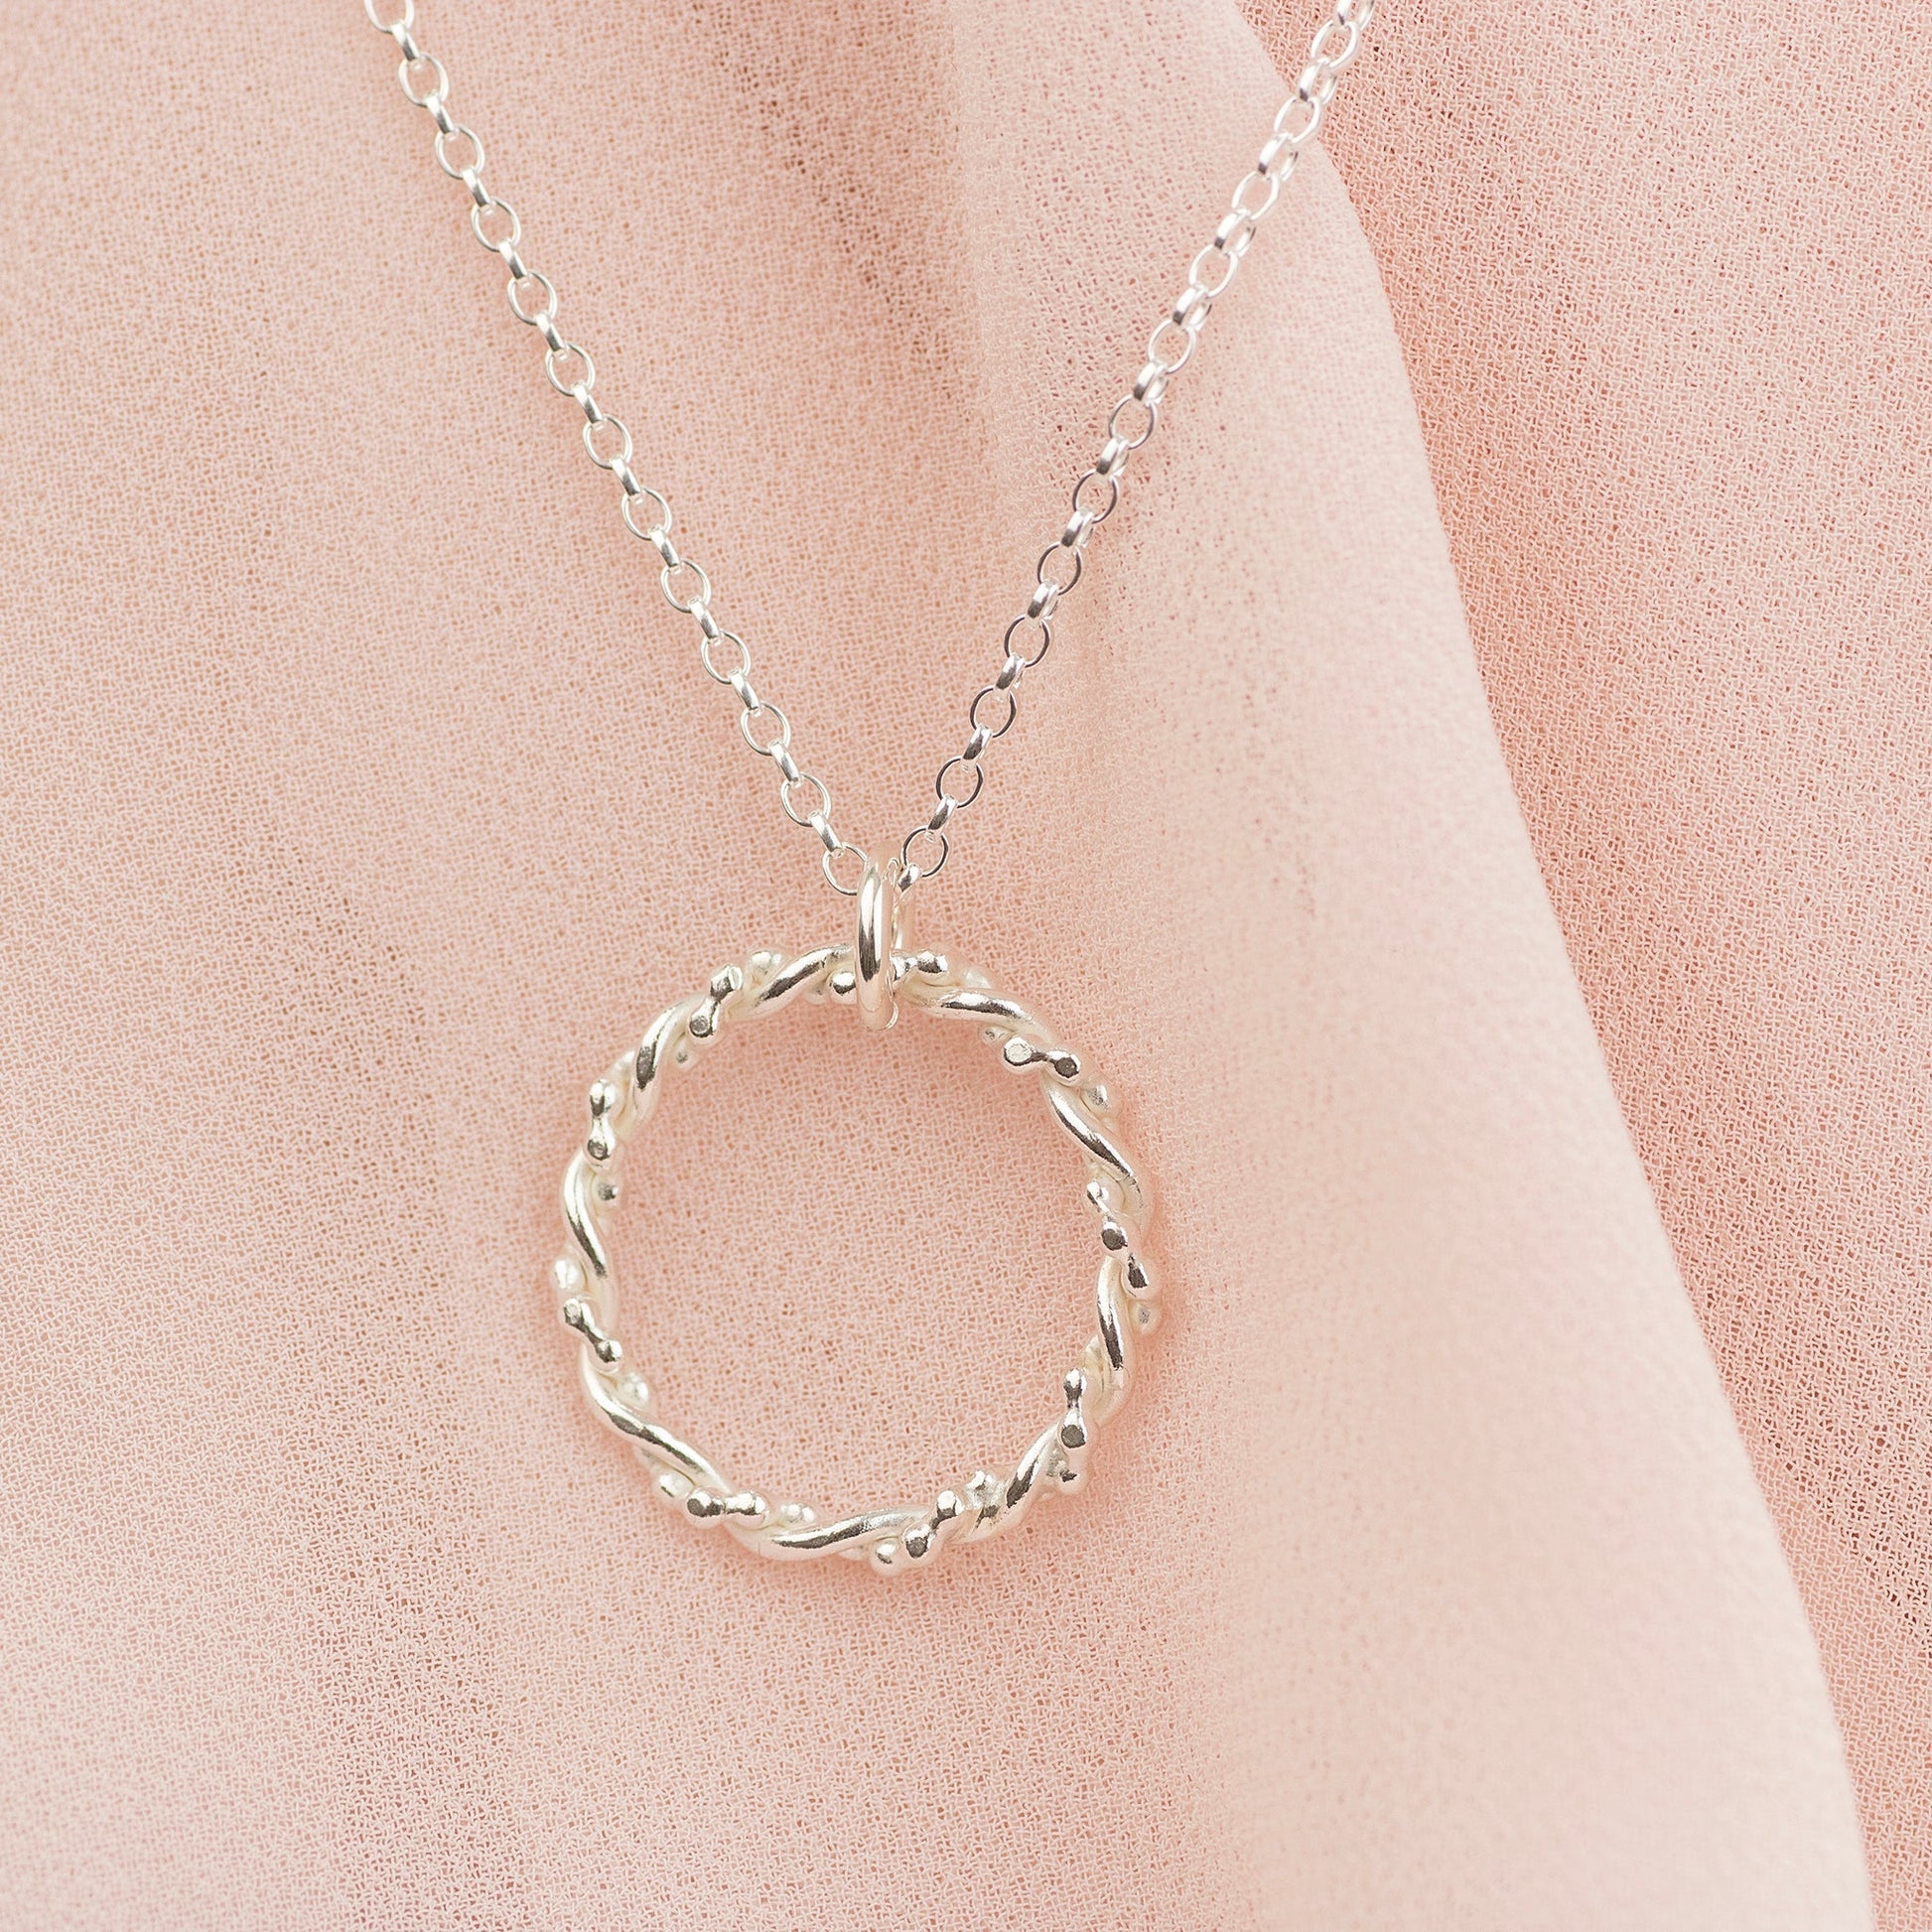 Entwined Halo Necklace - Silver - Linked for a Lifetime